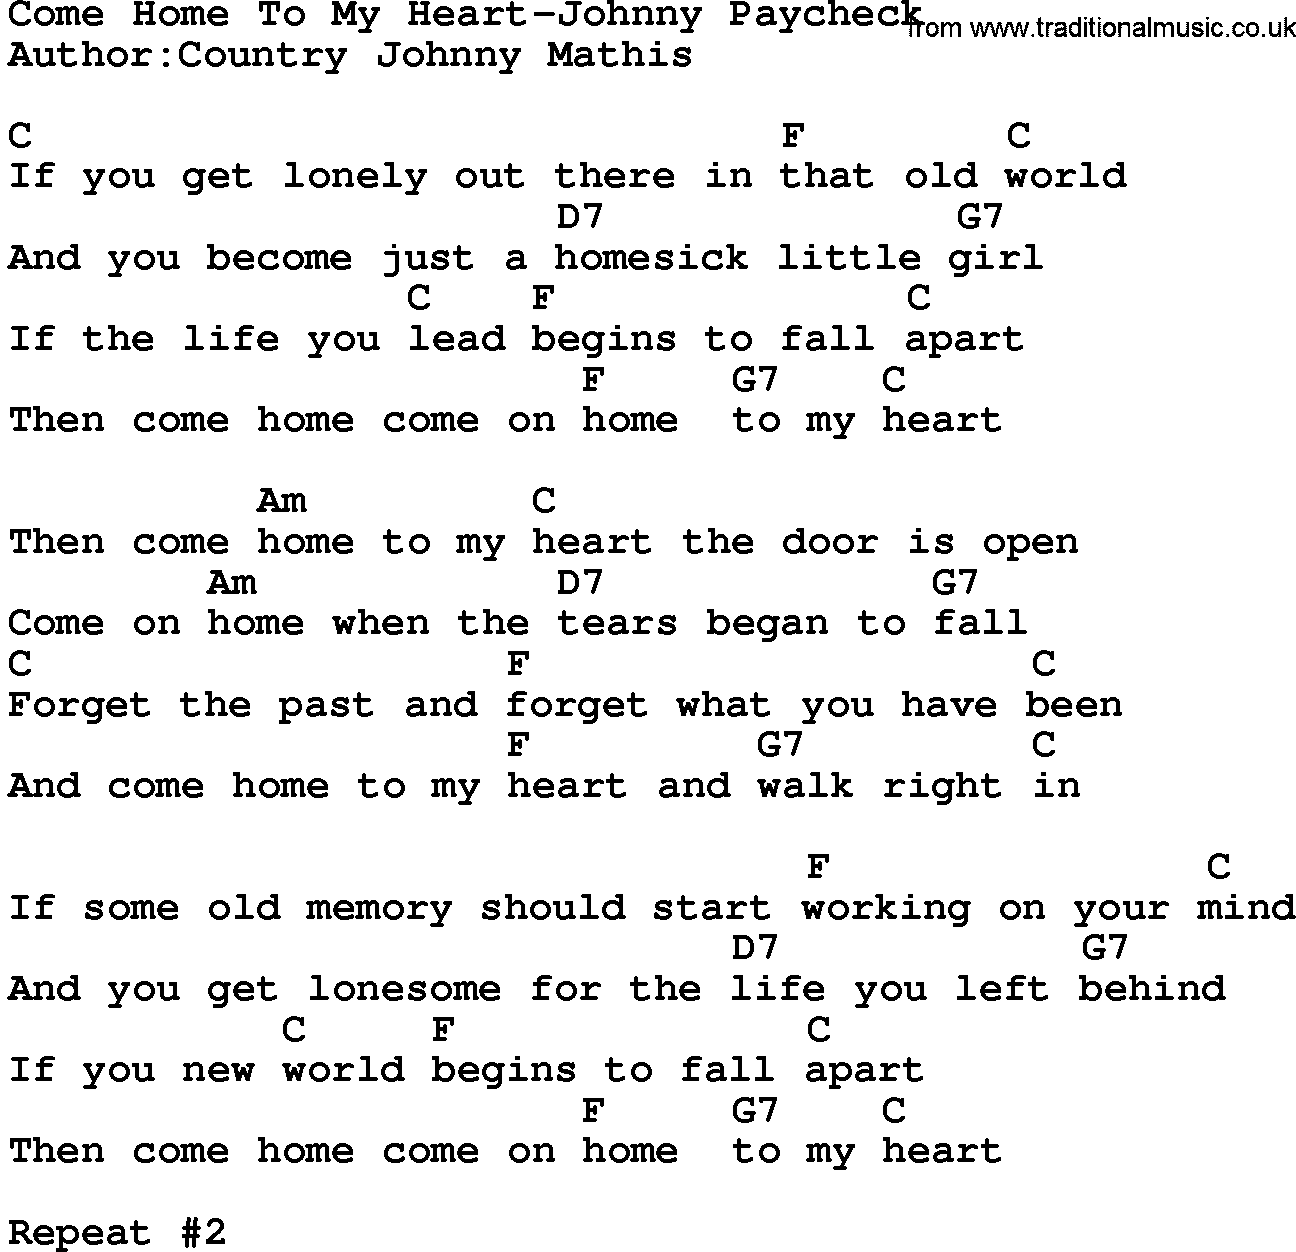 Country music song: Come Home To My Heart-Johnny Paycheck lyrics and chords